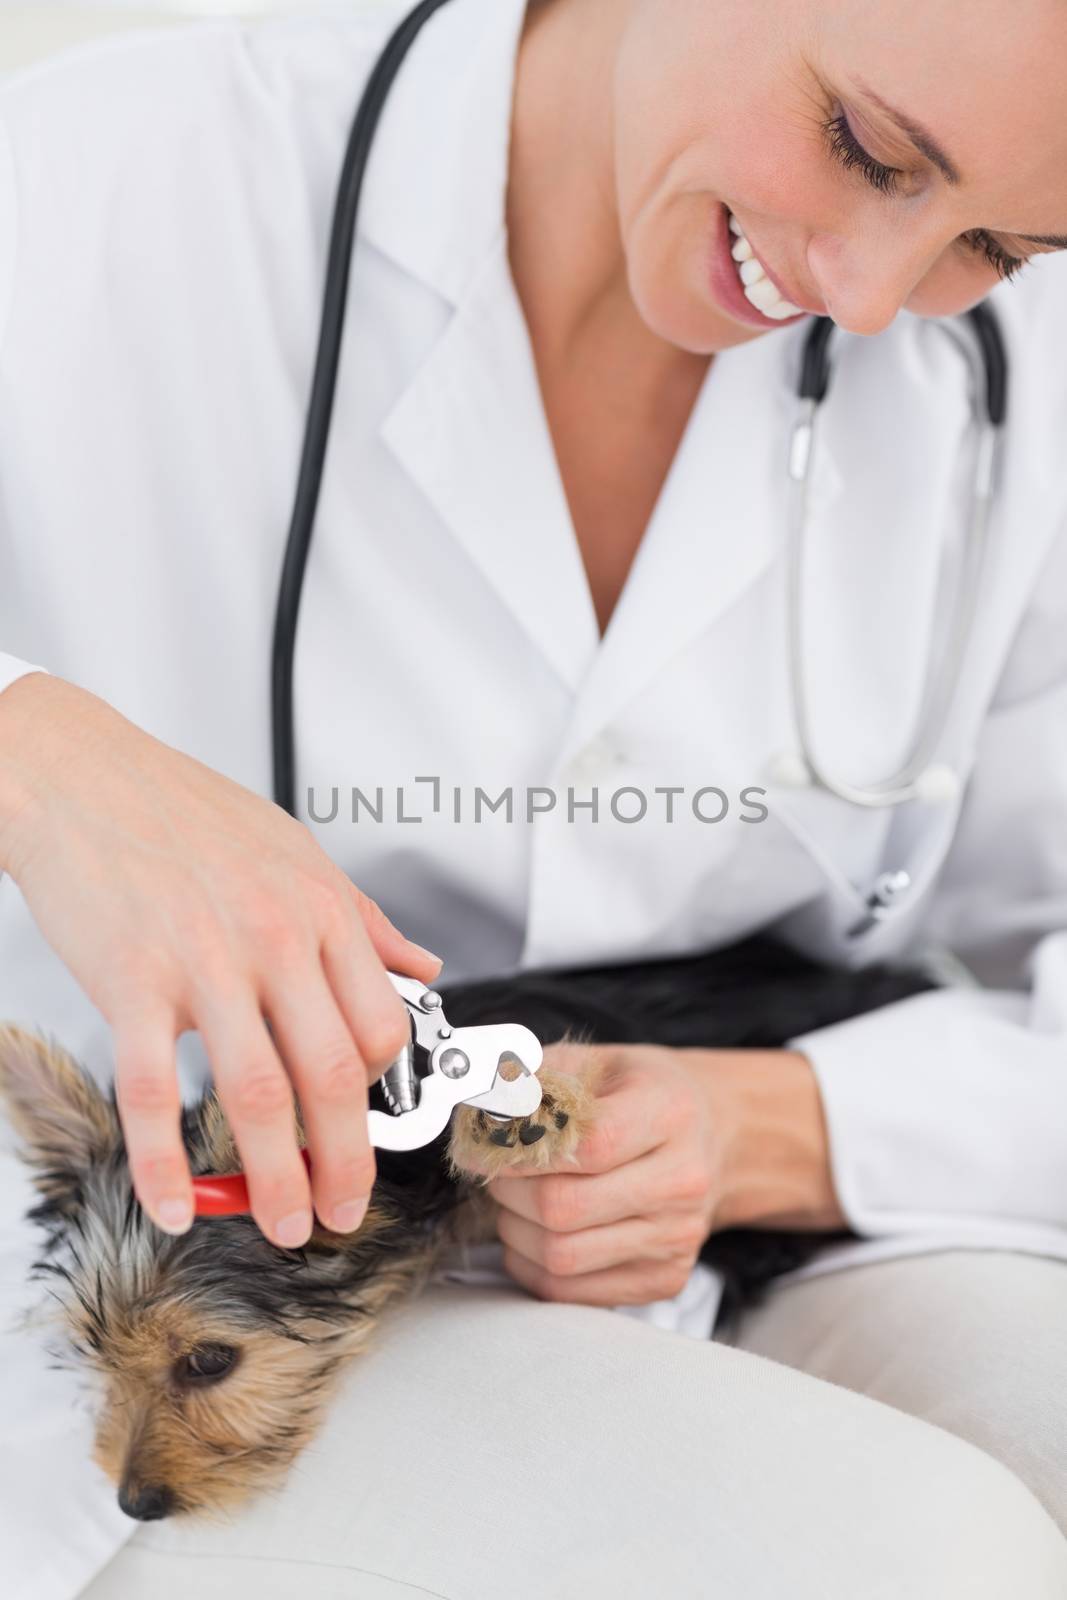 Dog getting claws trimmed by vet by Wavebreakmedia